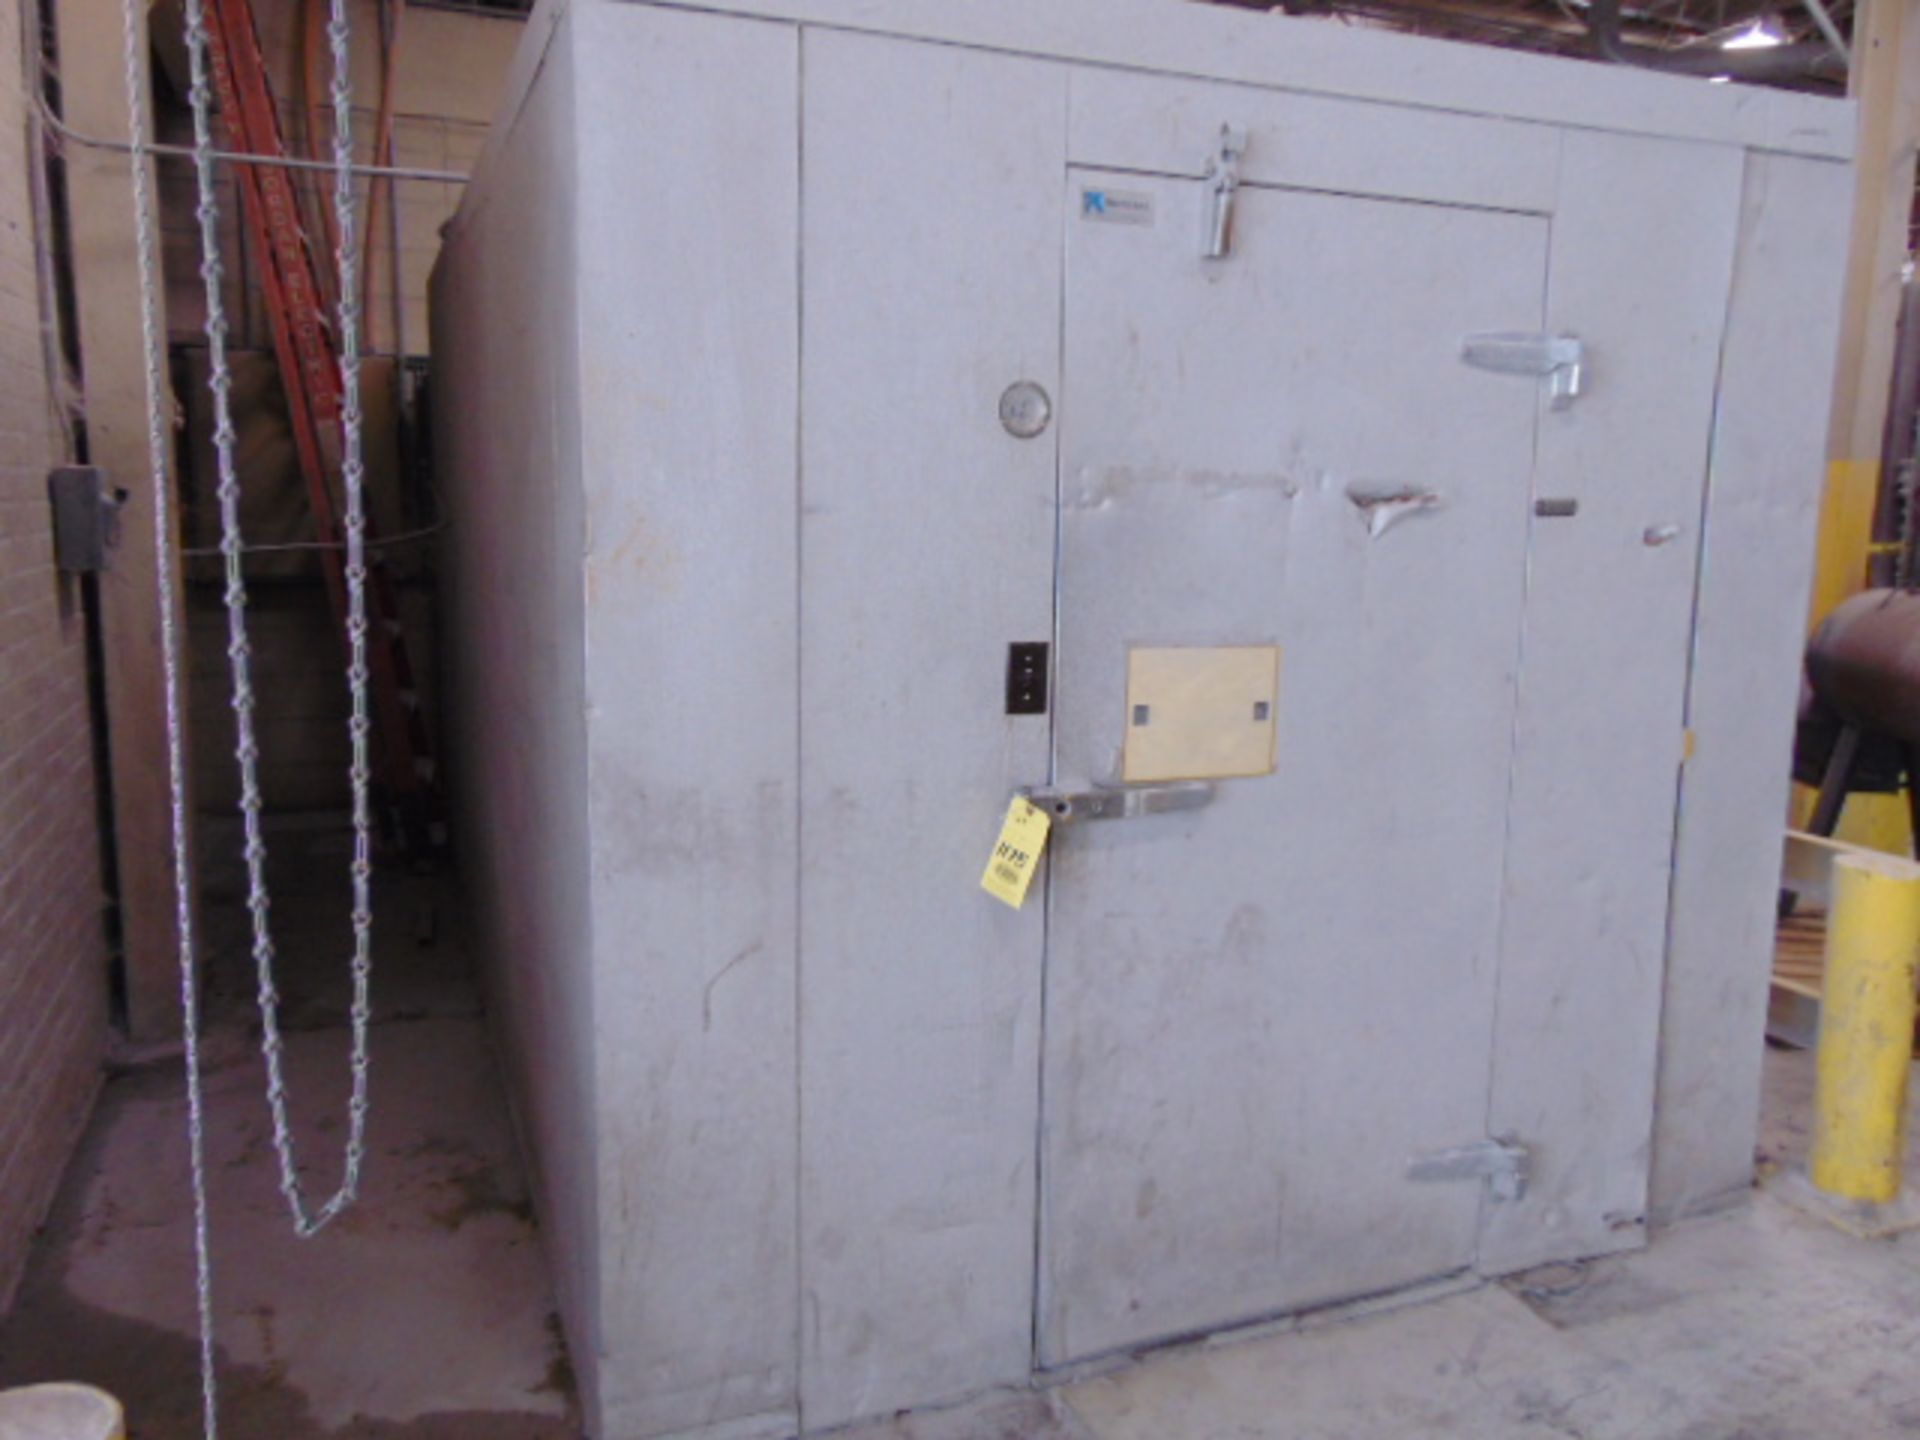 THERMAL-KOOL WALK-IN COOLER, approx. 6’W. x 12’ dp., unitized chiller, insulated panel